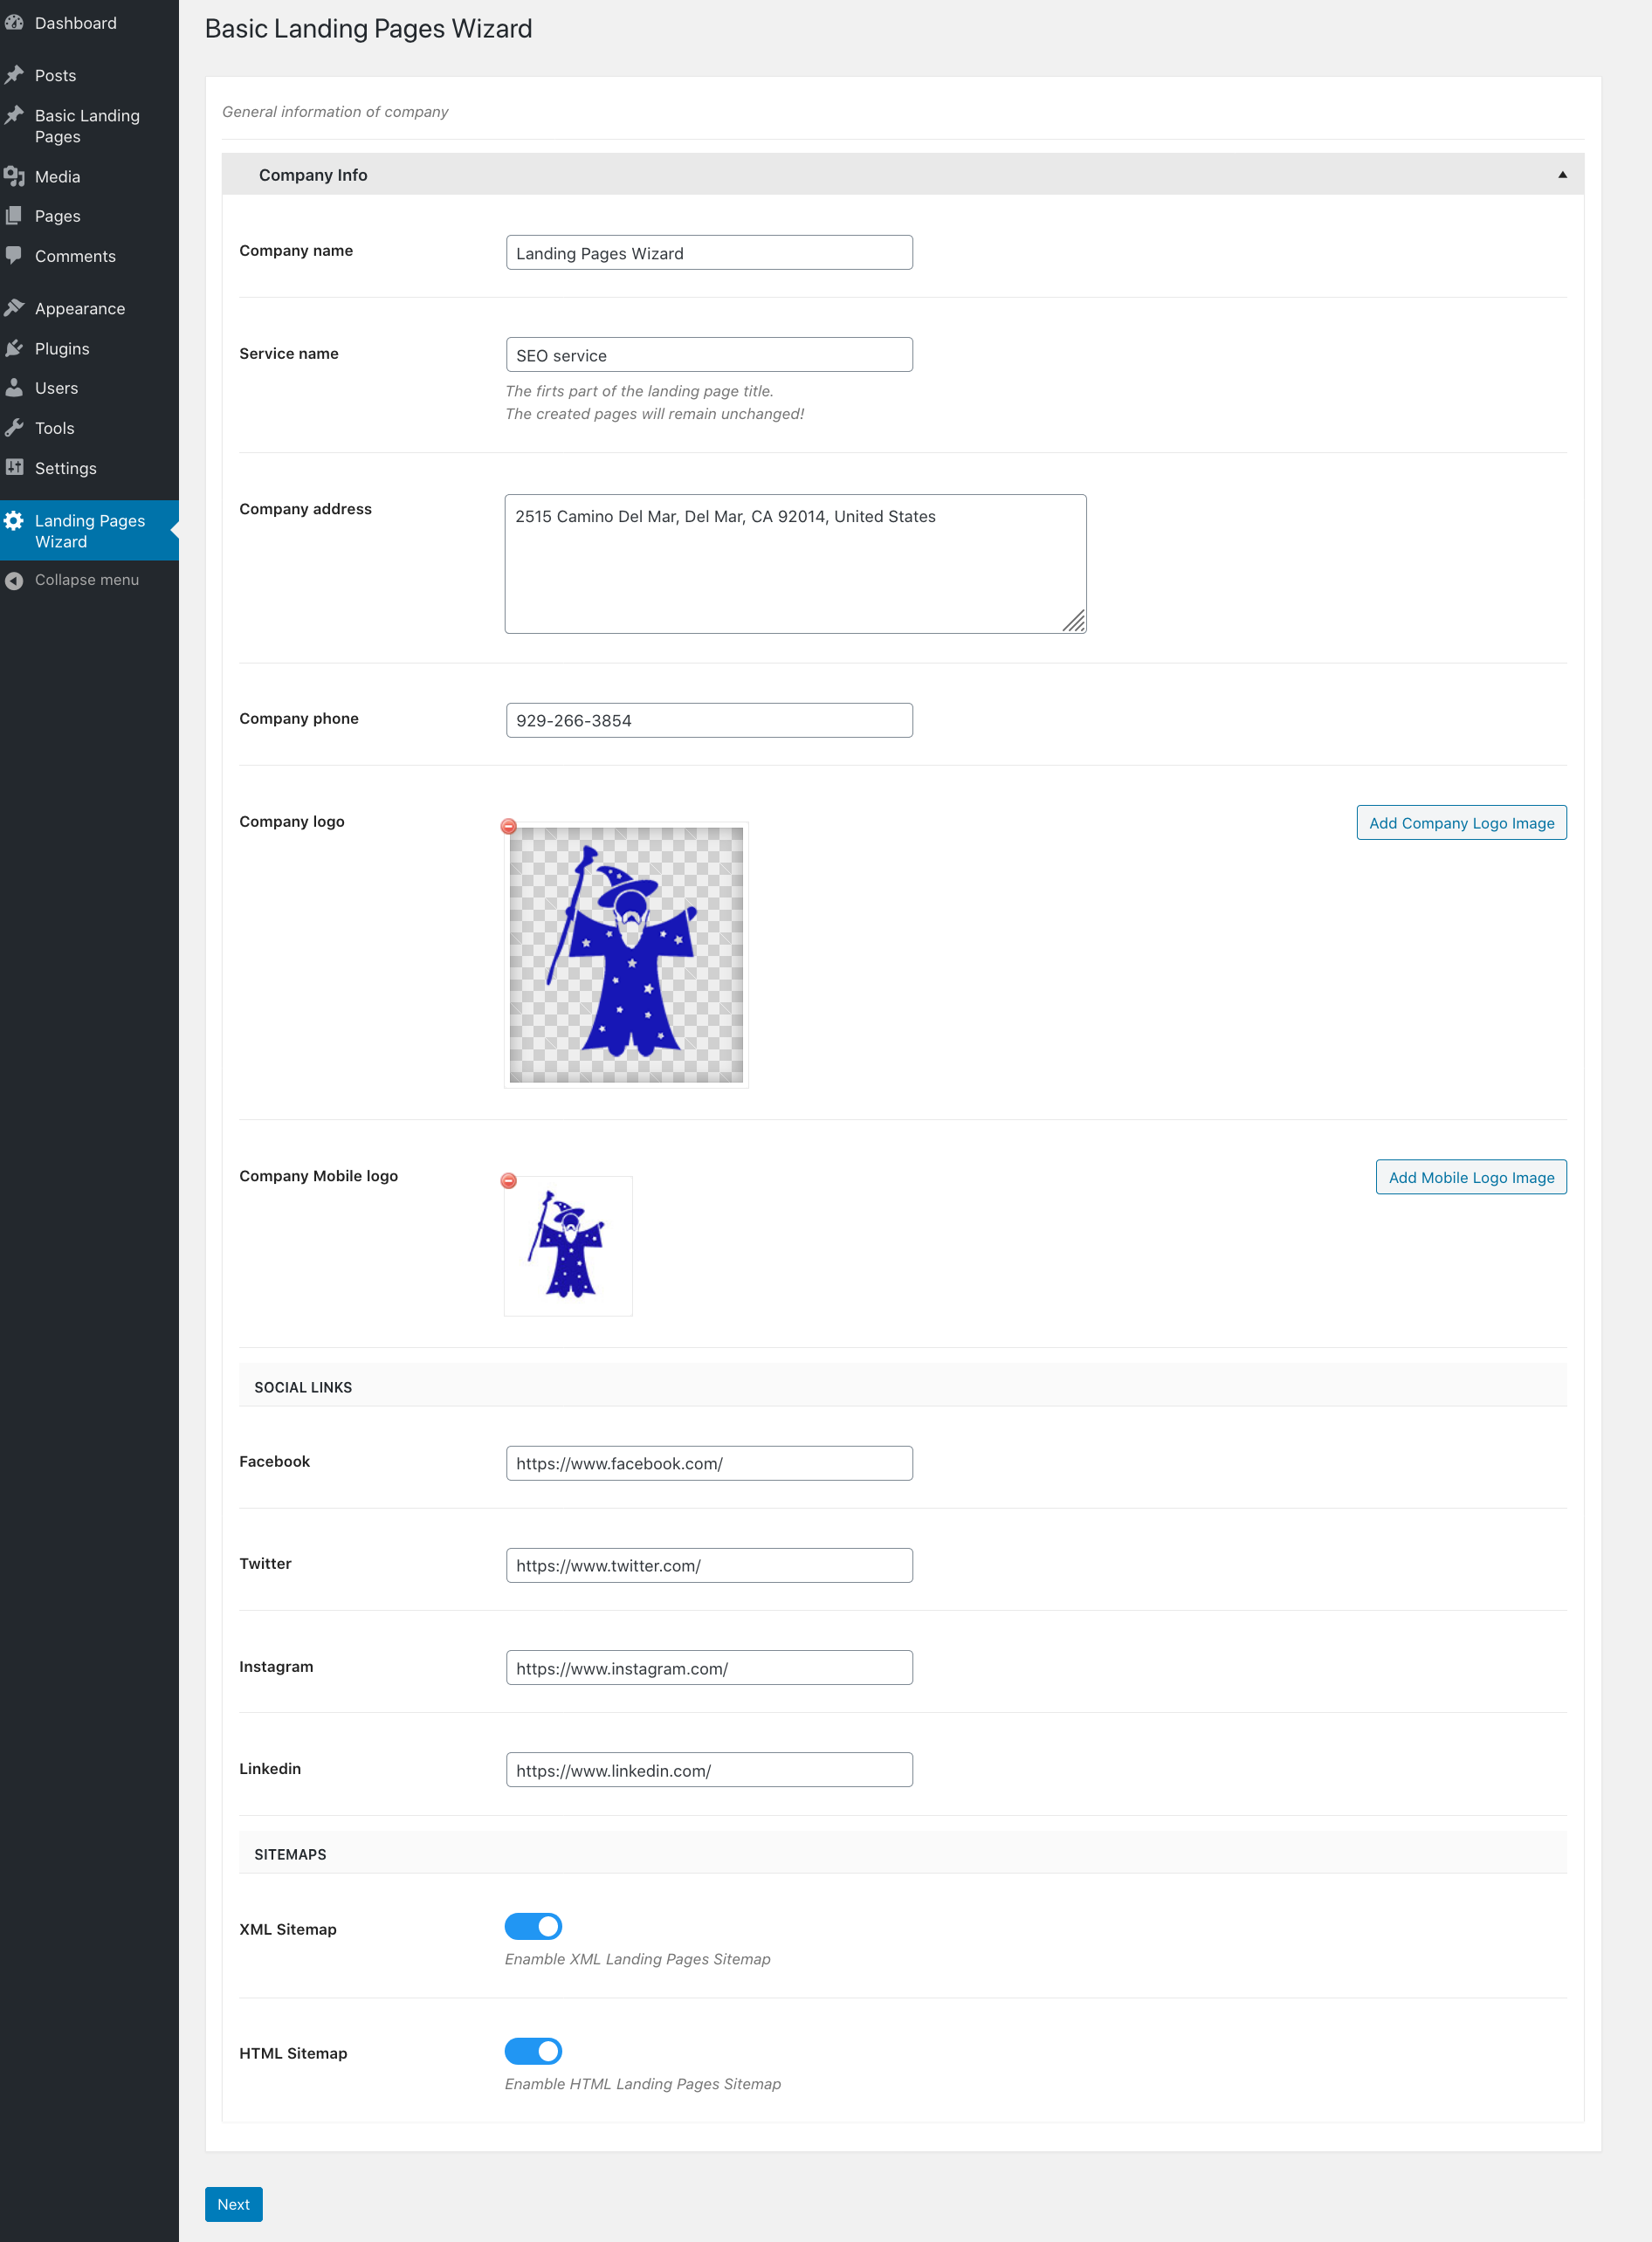 Here you can see setting for a plugin. You have to add service name, company name address, and logos.